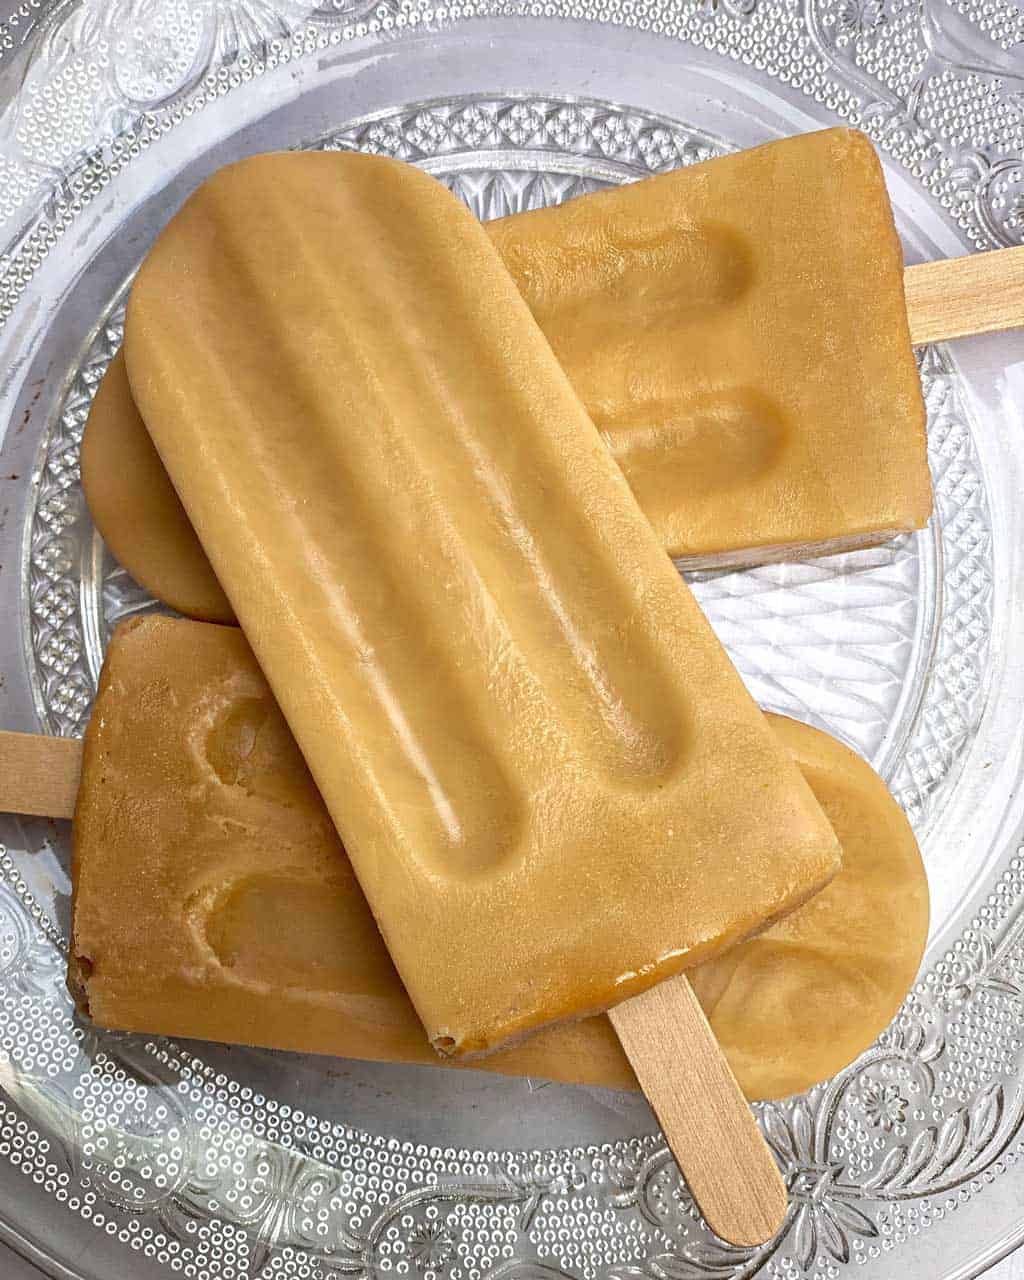 A Recipe for Creamy Caramel Ice Lollies {with just 2 ingredients}